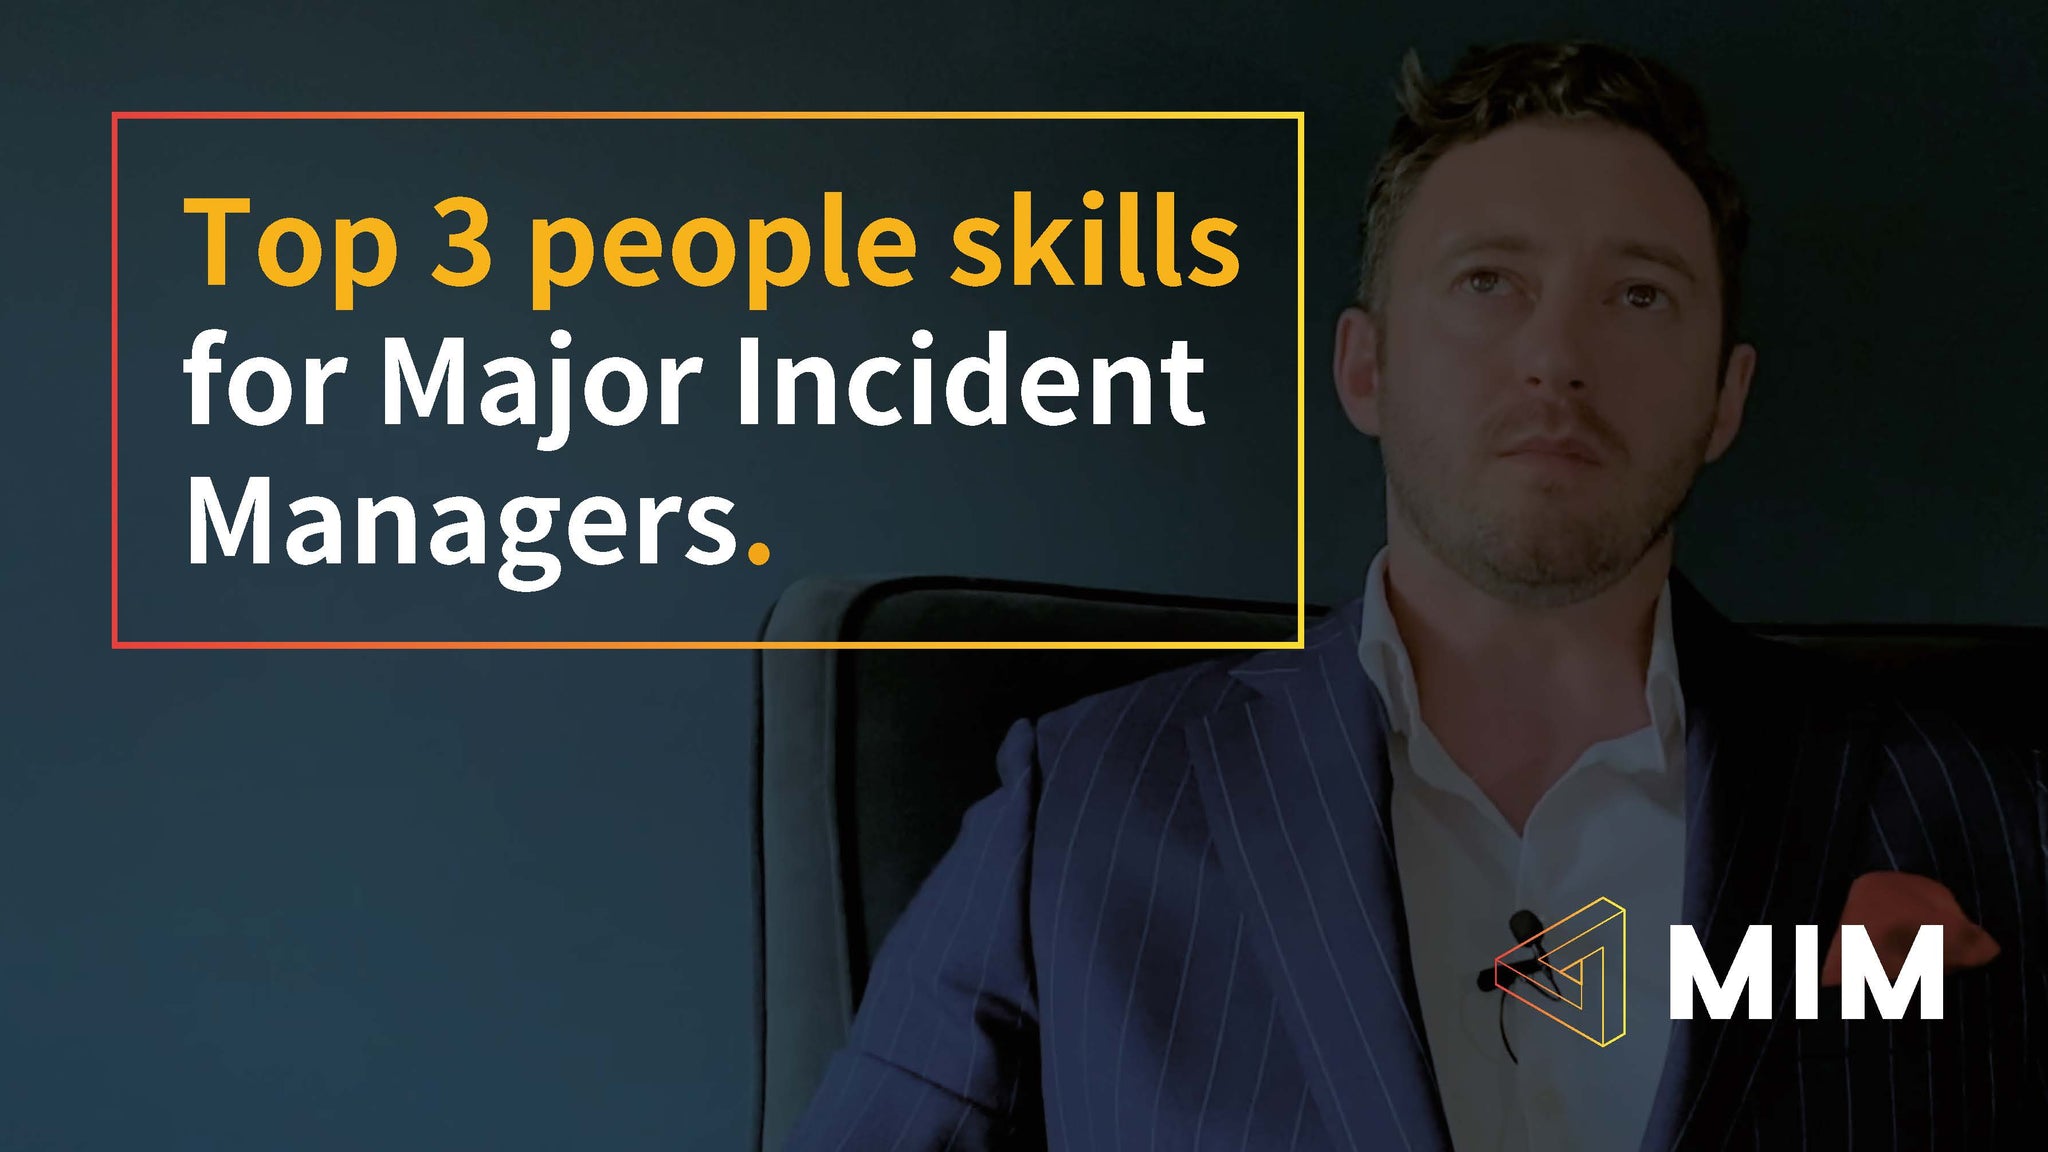 Top 3 people skills for Major Incident Managers